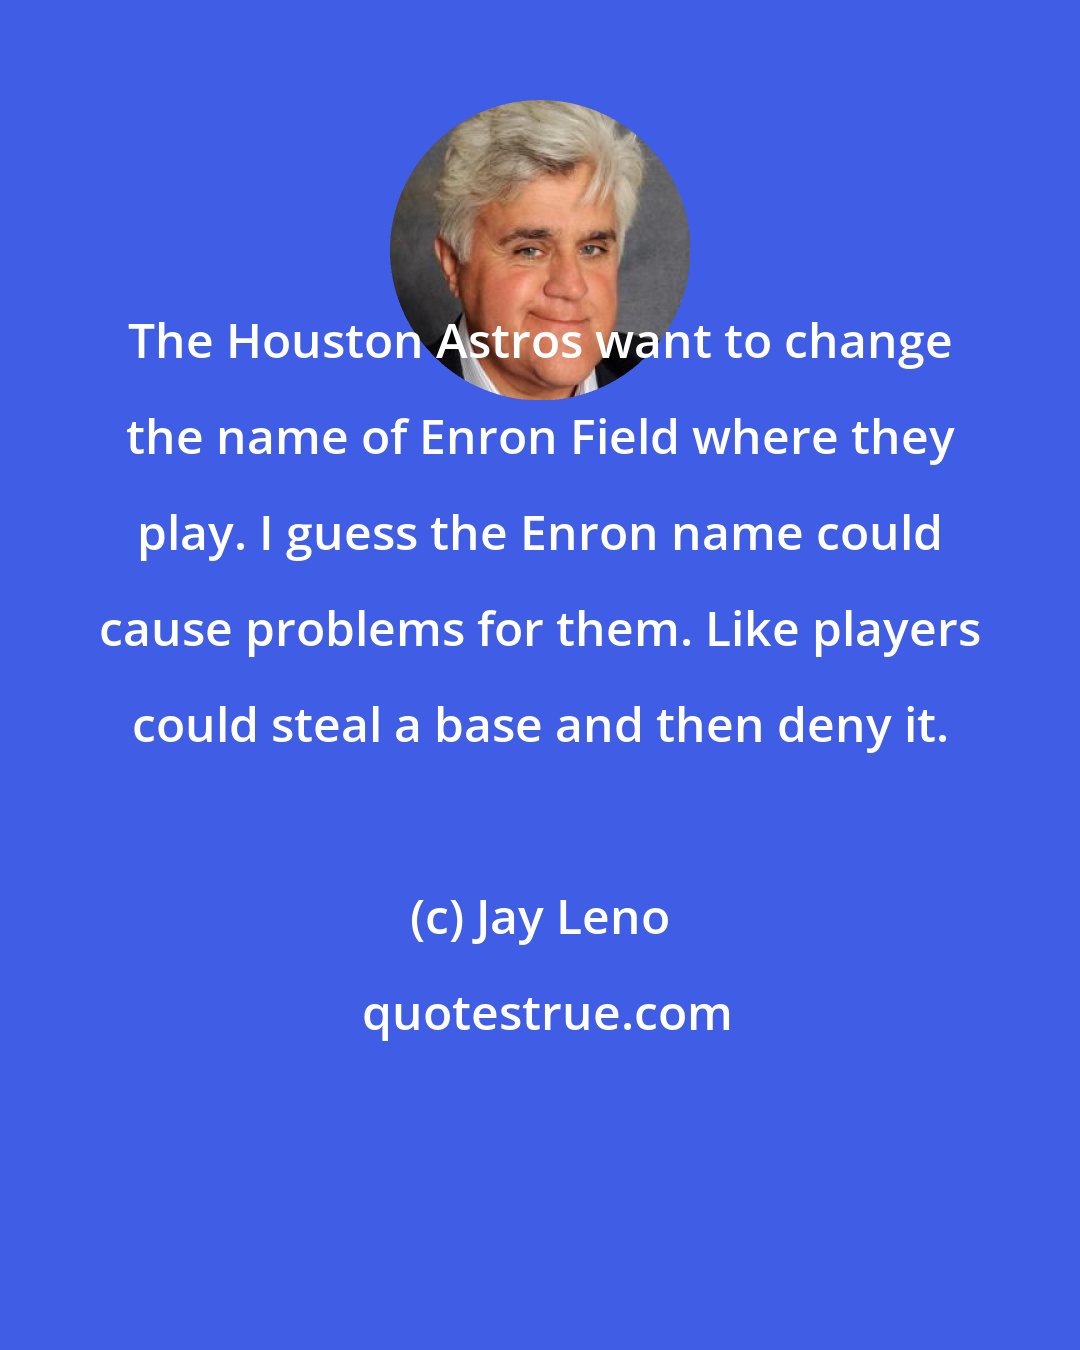 Jay Leno: The Houston Astros want to change the name of Enron Field where they play. I guess the Enron name could cause problems for them. Like players could steal a base and then deny it.